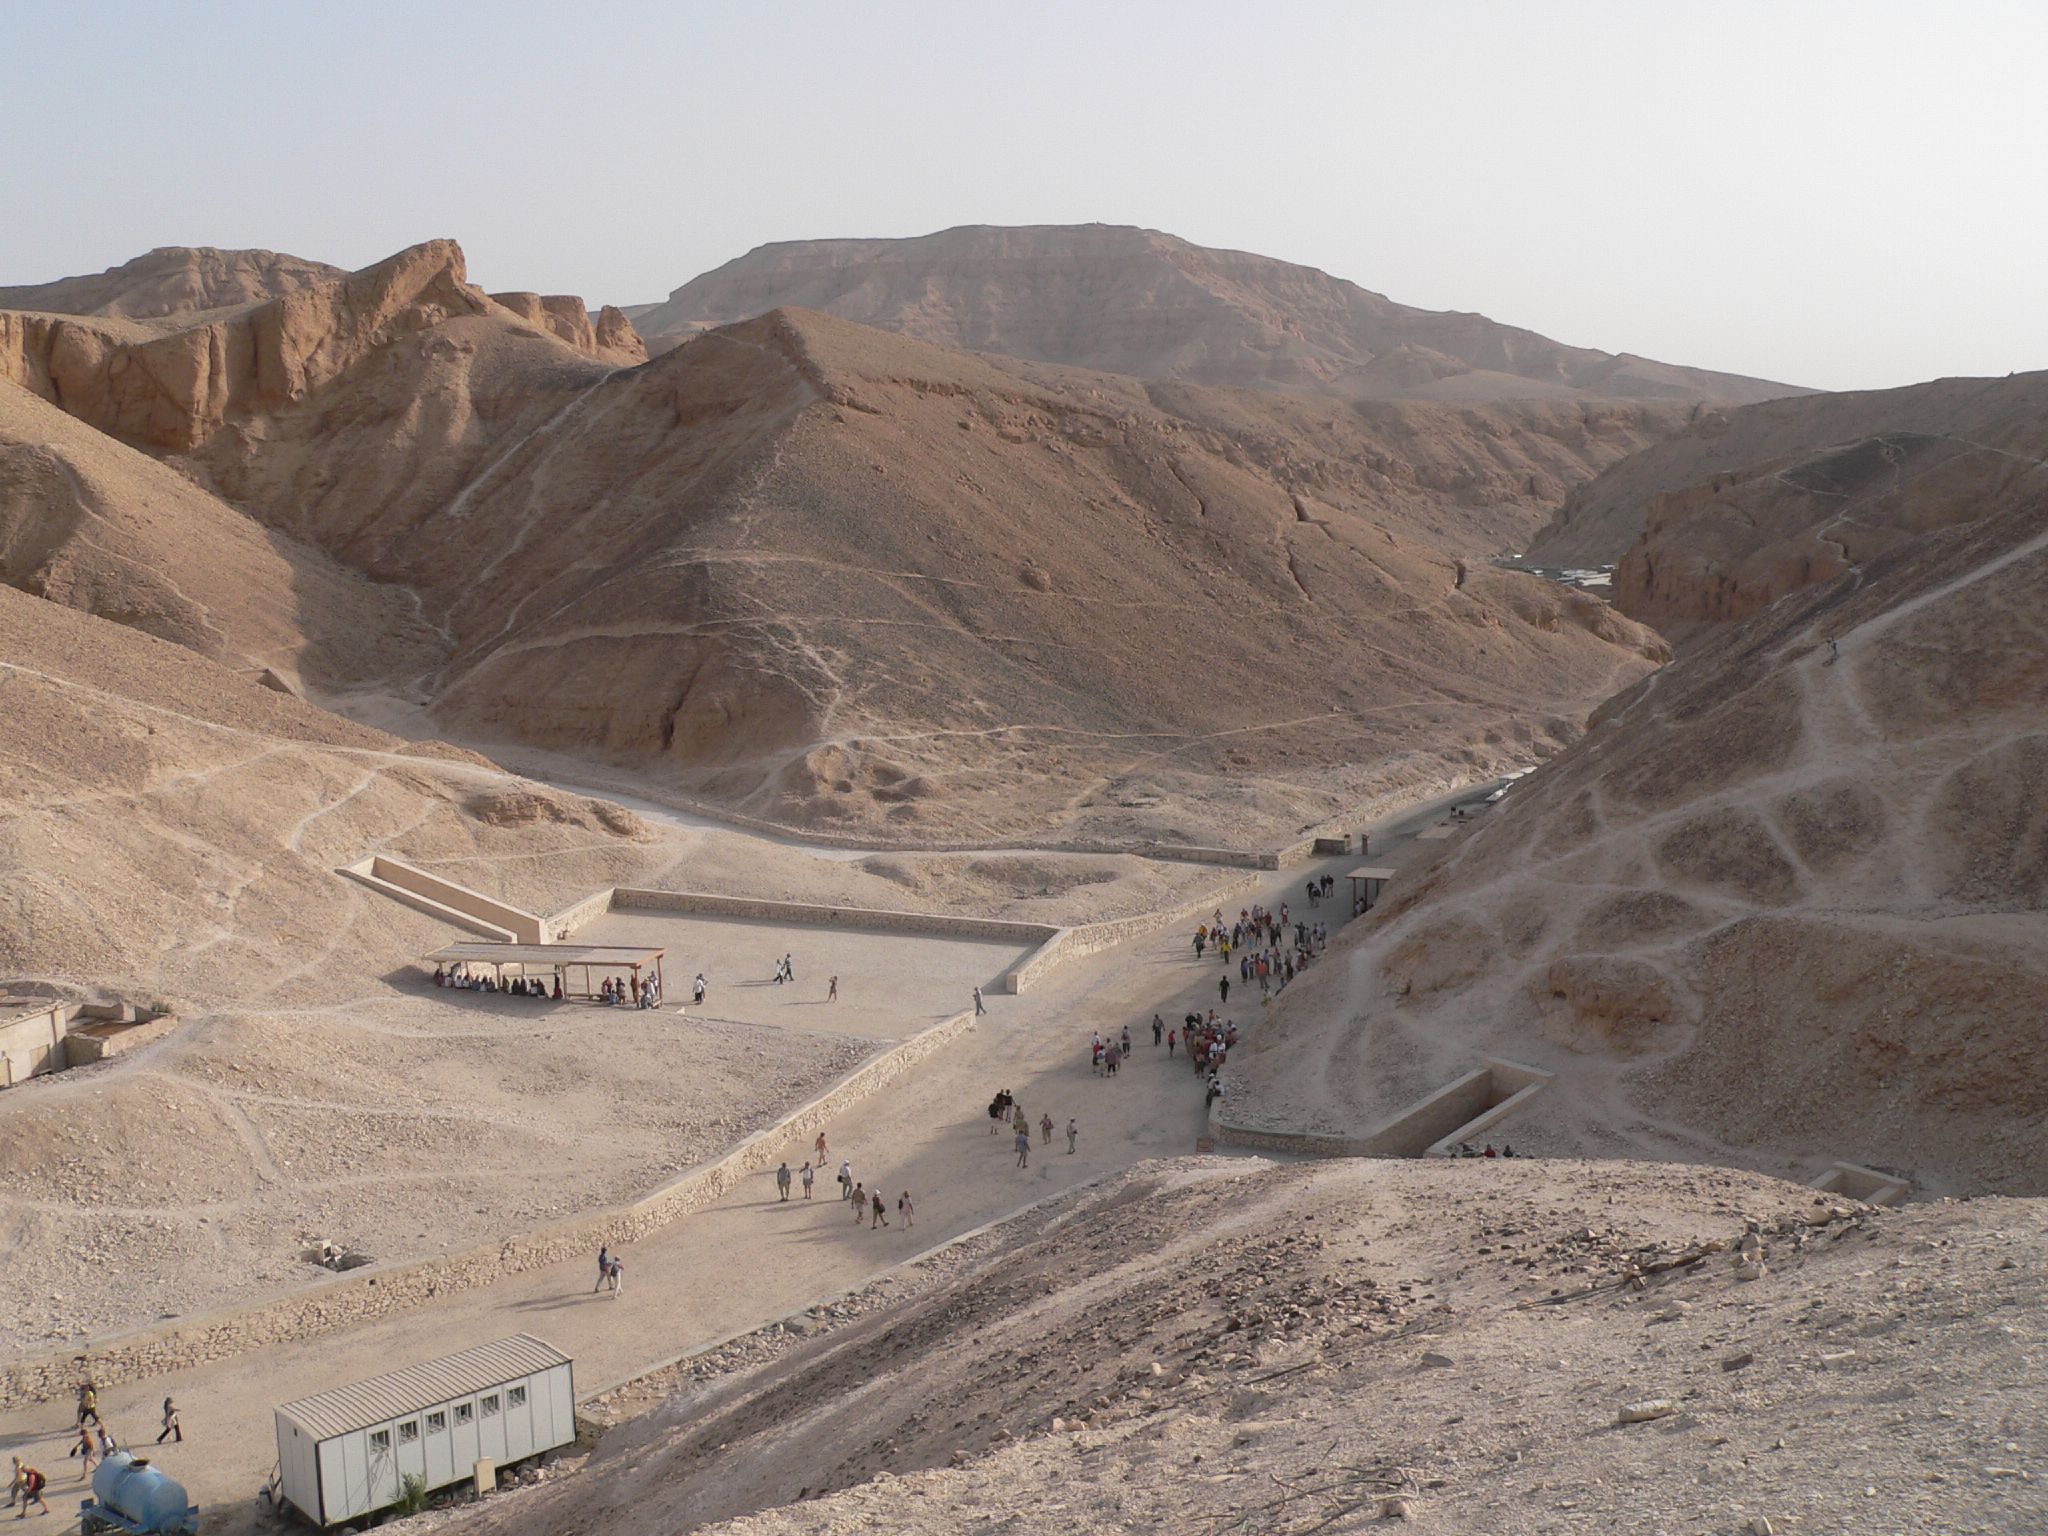 Valley of the Kings, Egypt (photo: Troels Myrup, CC BY-NC-ND 2.0)